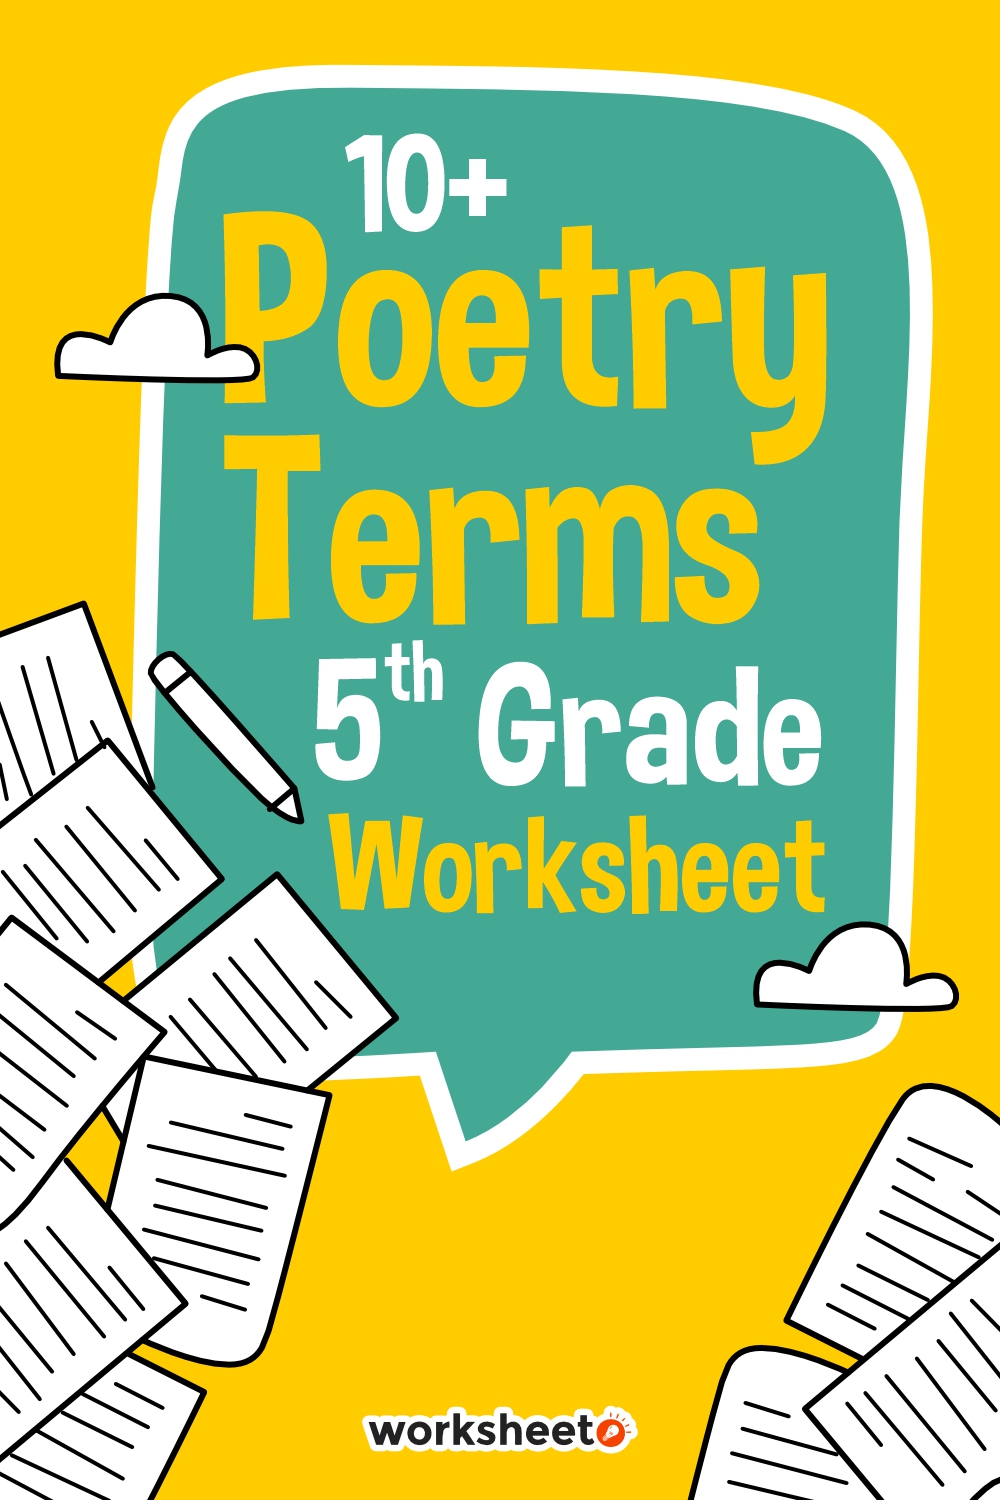 19-poetry-terms-5th-grade-worksheets-free-pdf-at-worksheeto